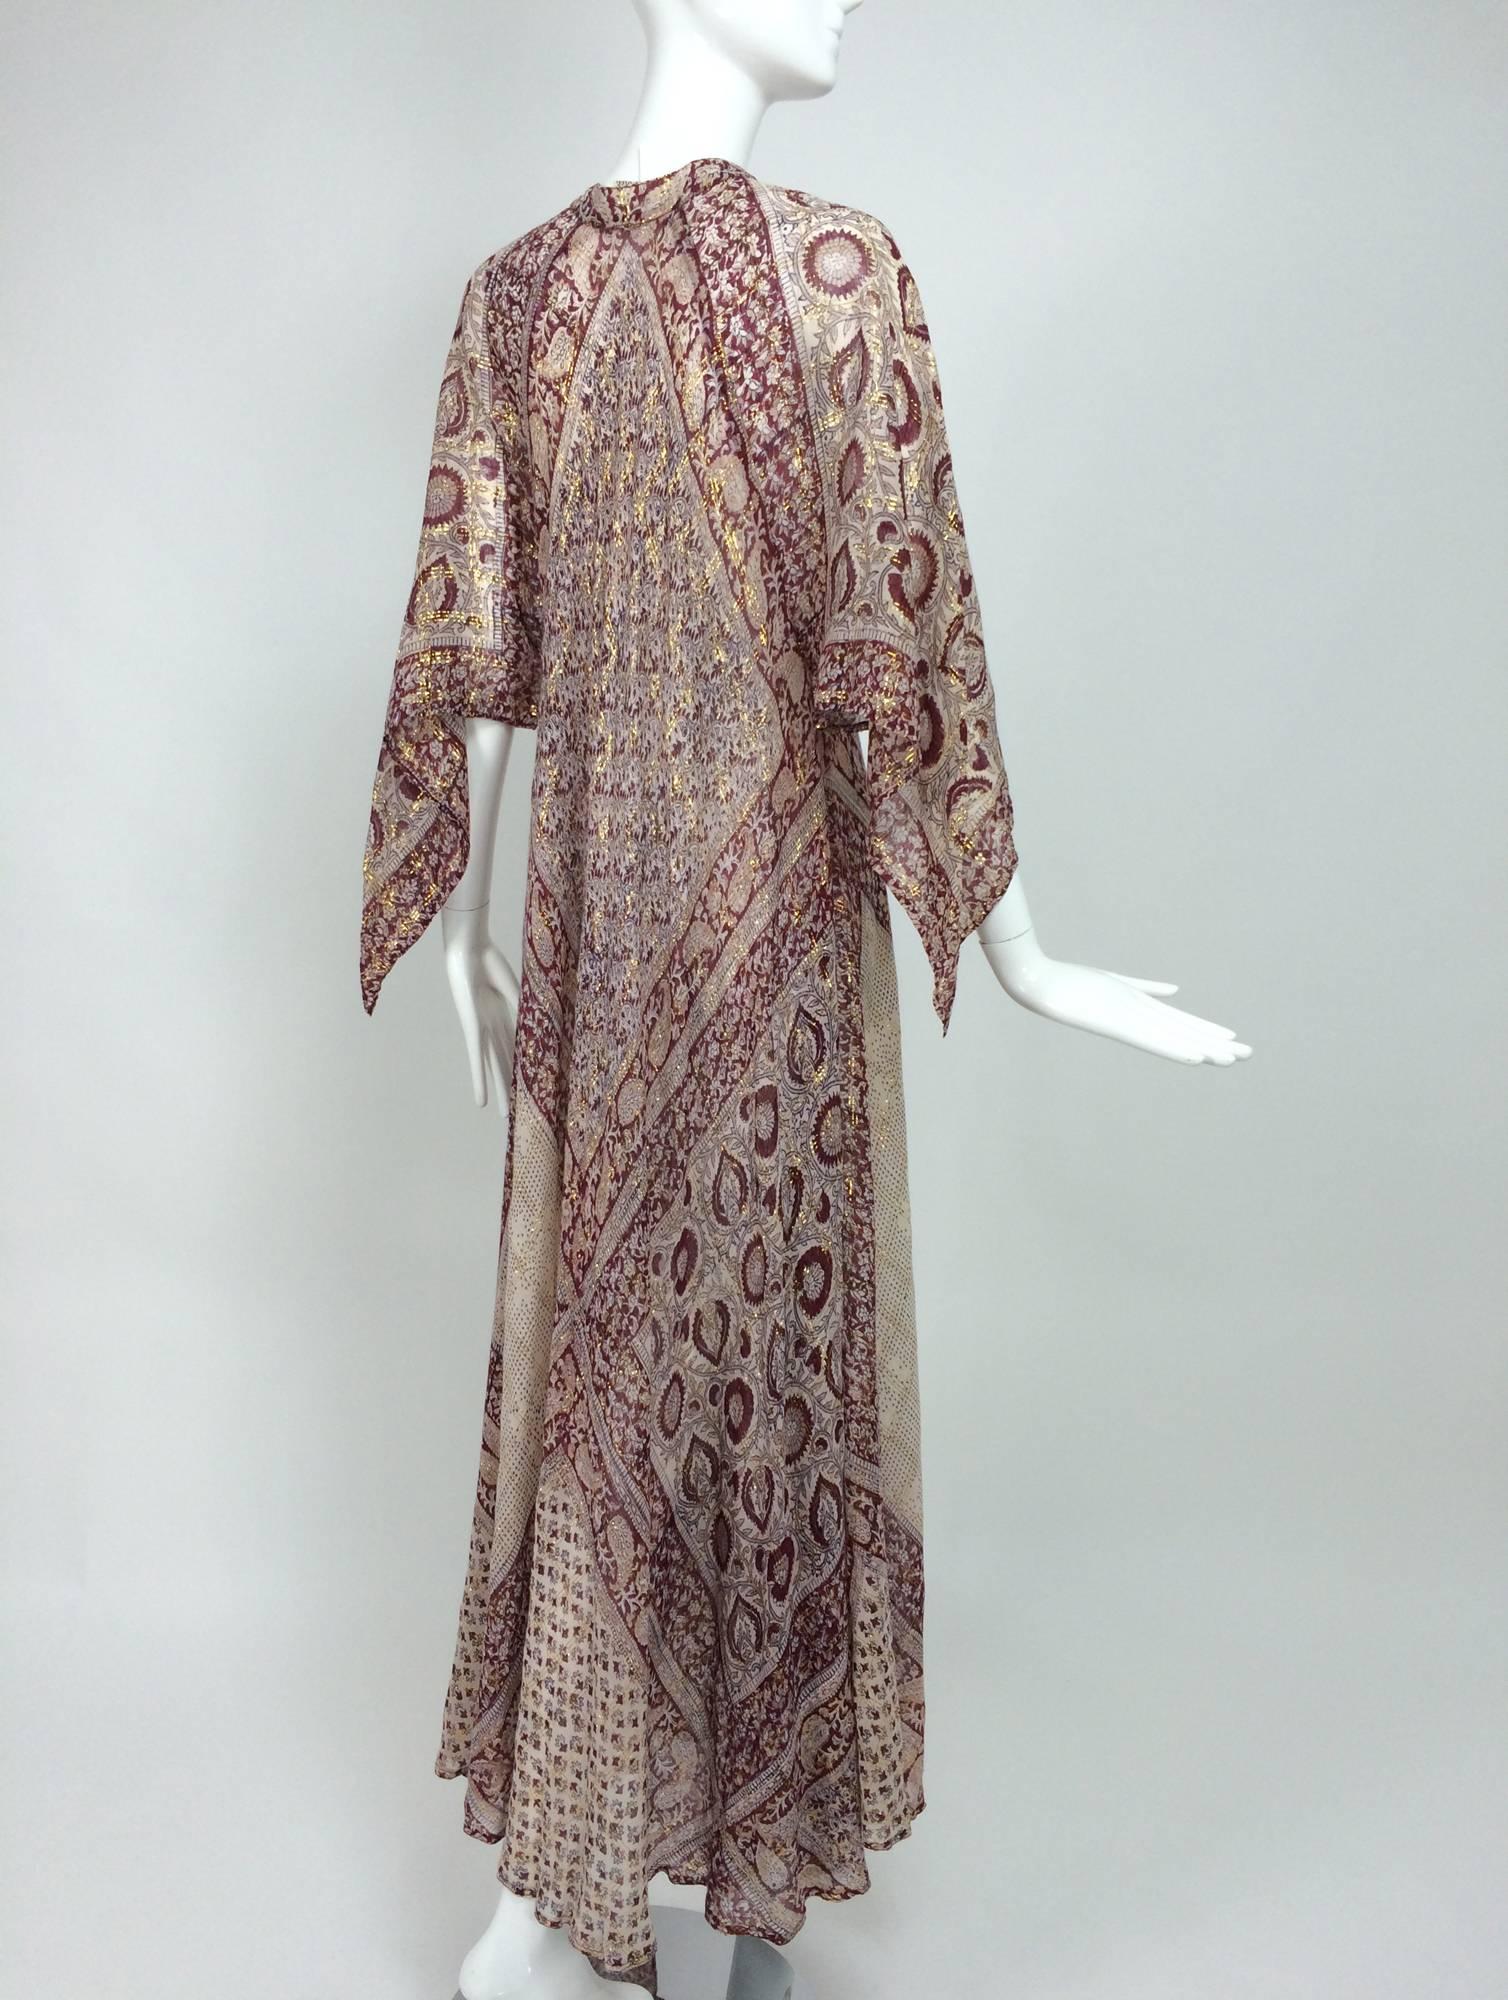 Sheer gauze block print with gold caftan from India 1960s Woodward & Lothrop 1